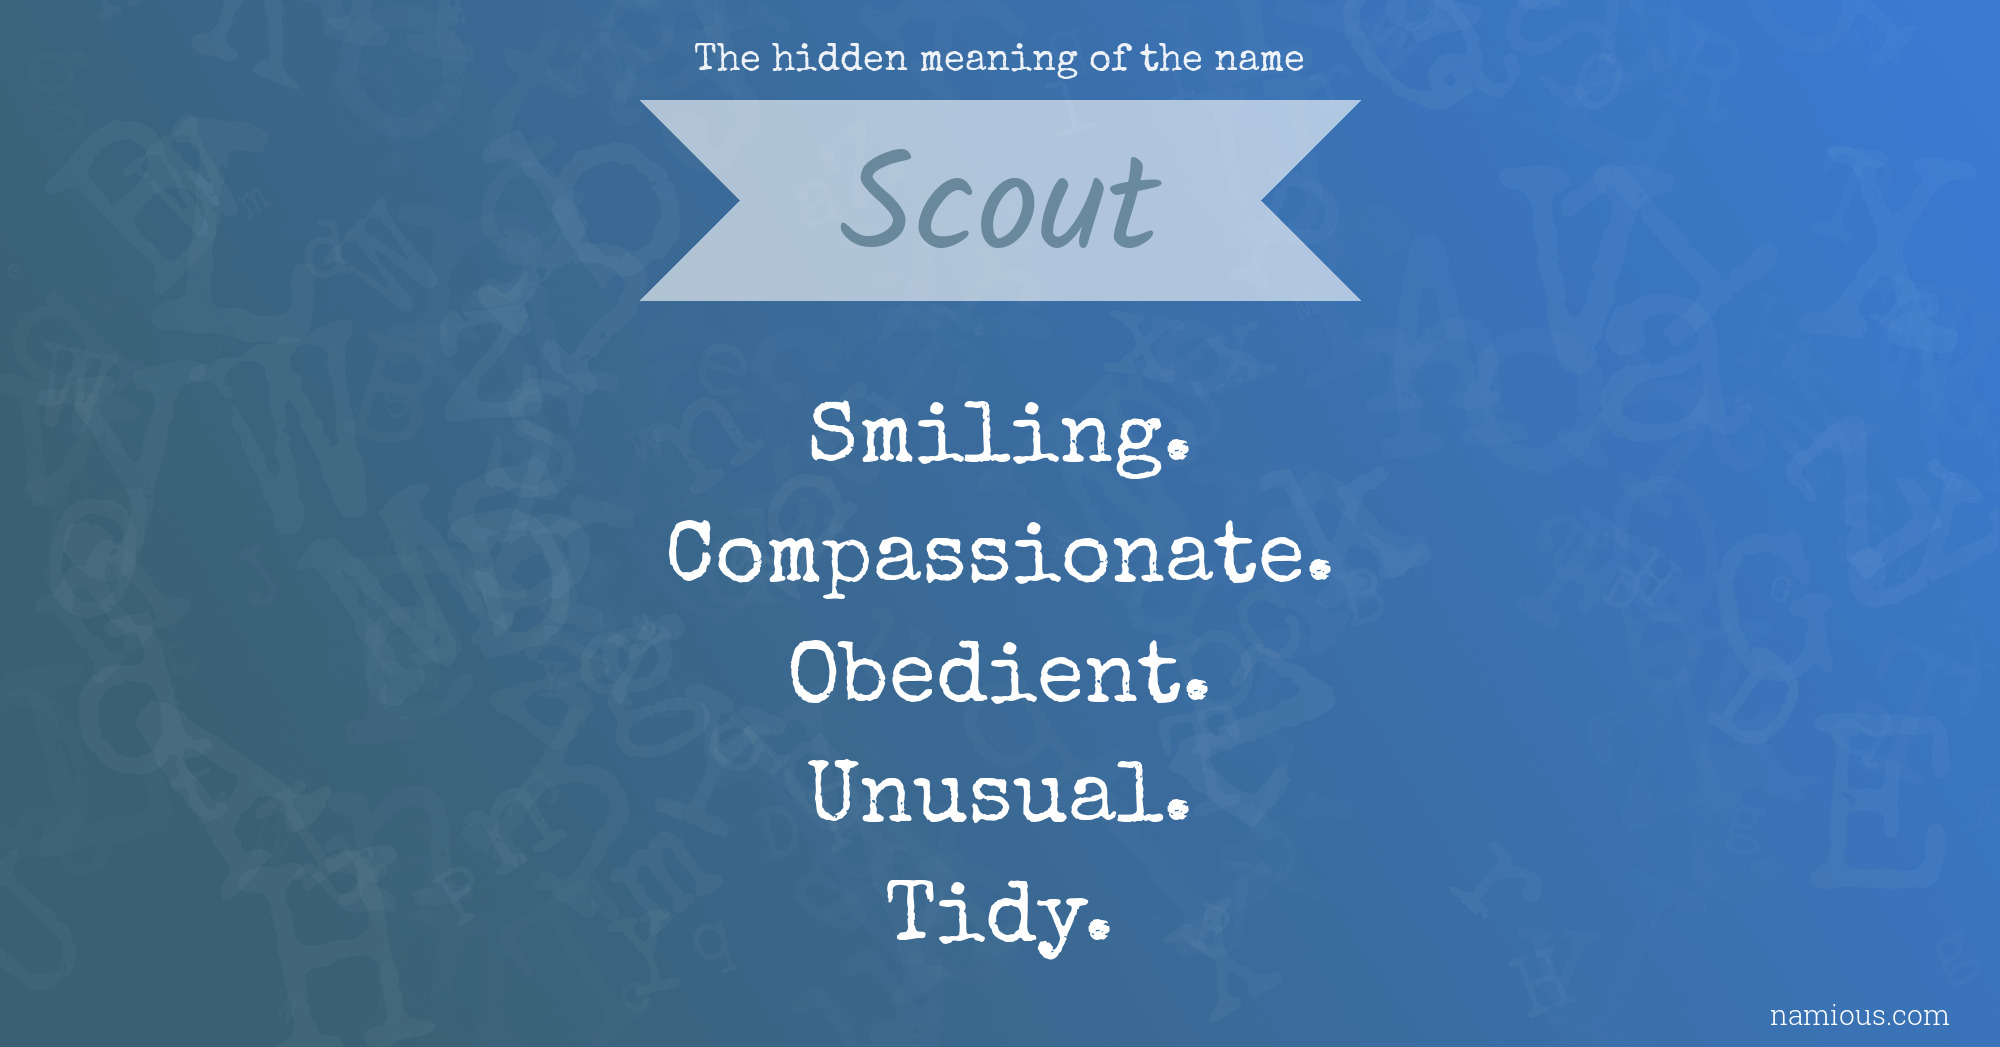 The hidden meaning of the name Scout